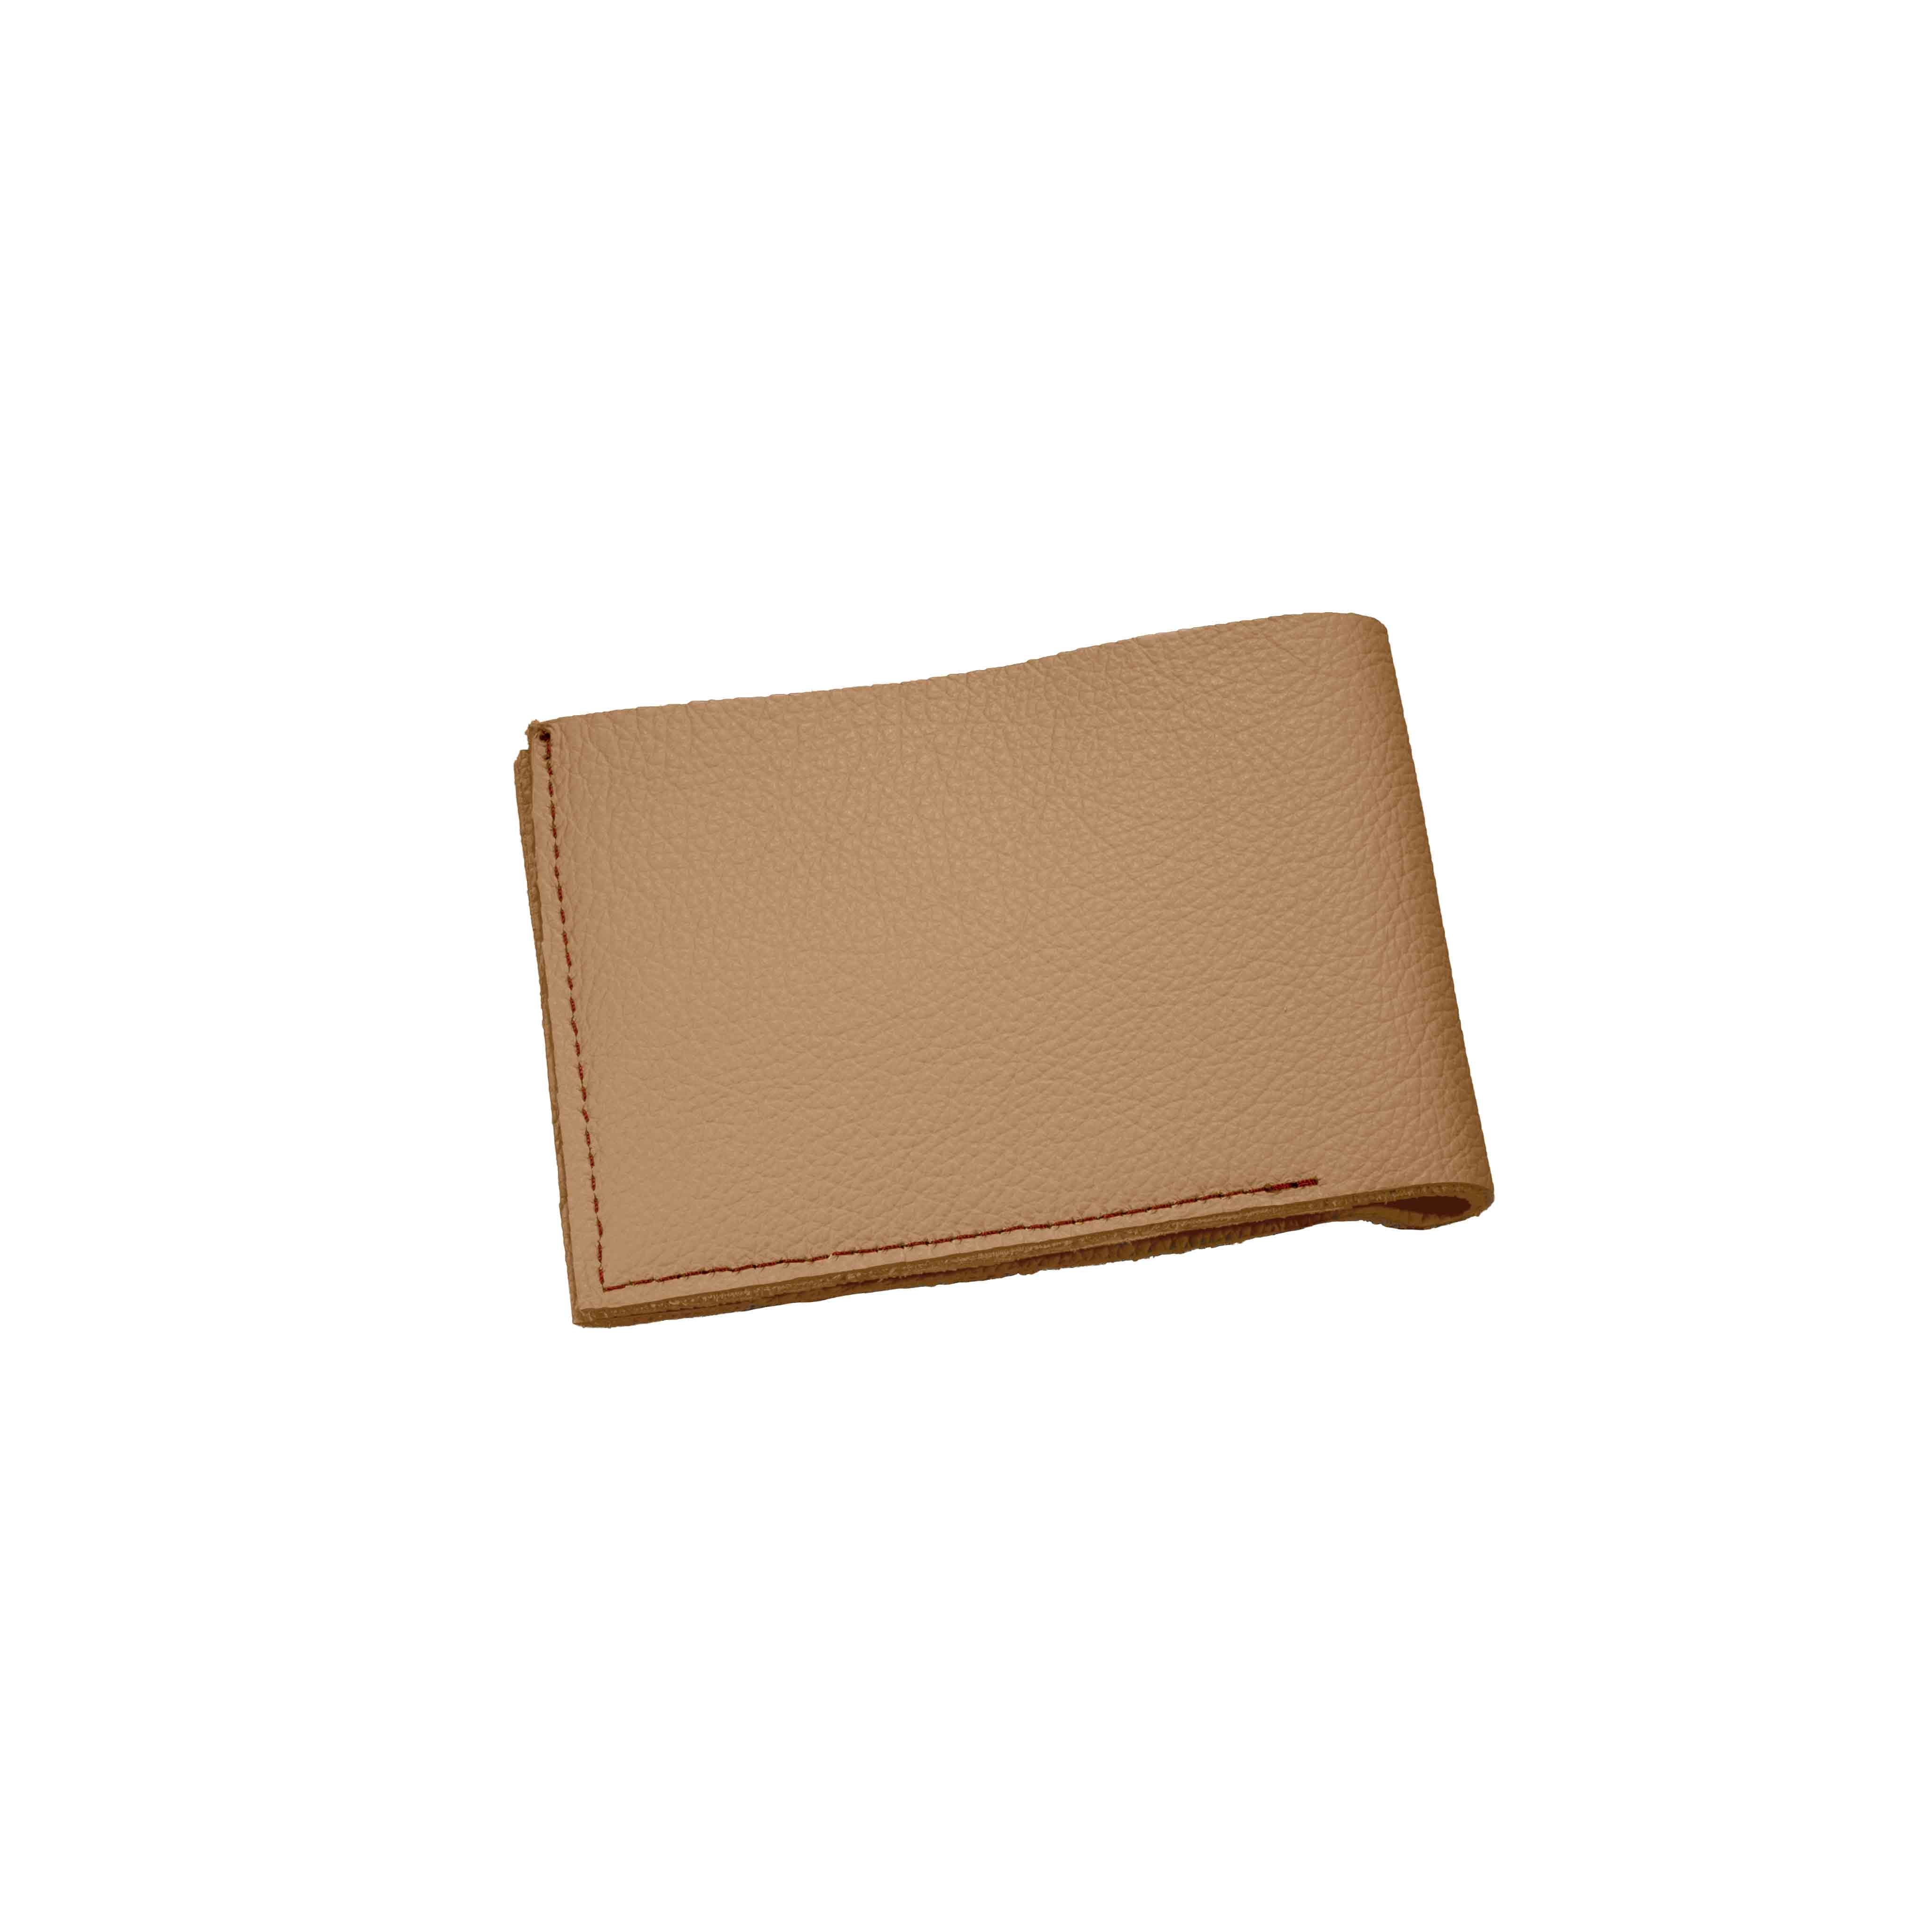 Wallet / Leather Grainy Finish / Sand